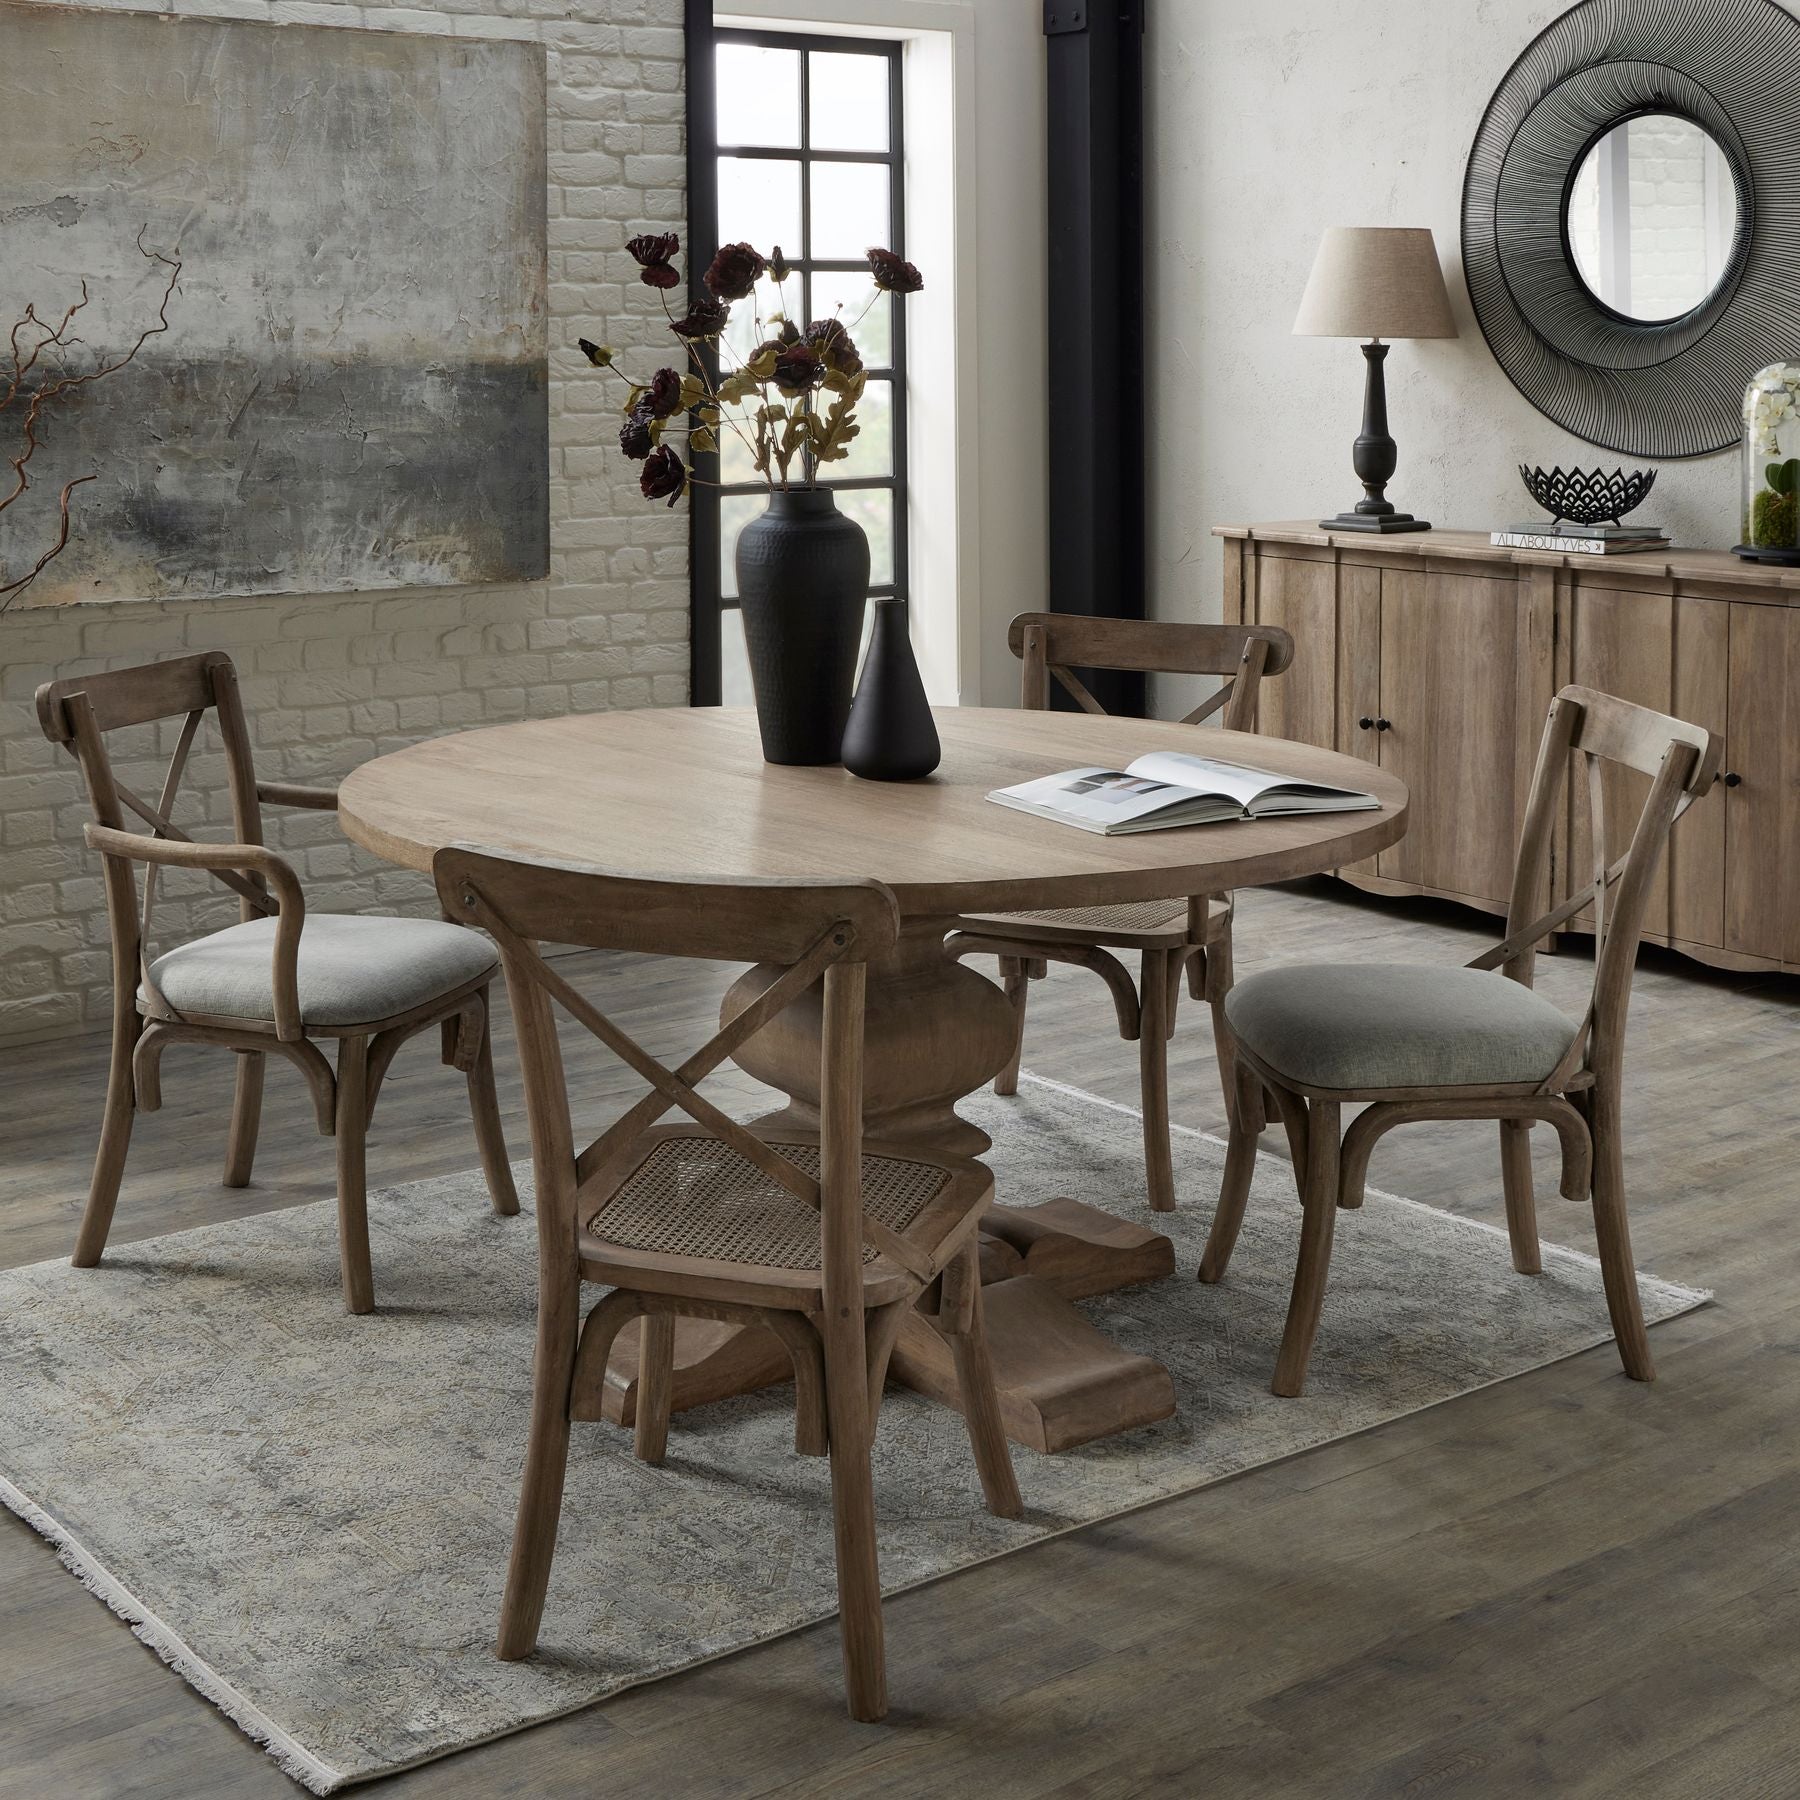 copsgrove round pedestal dining table - tidyspaces.co.uk